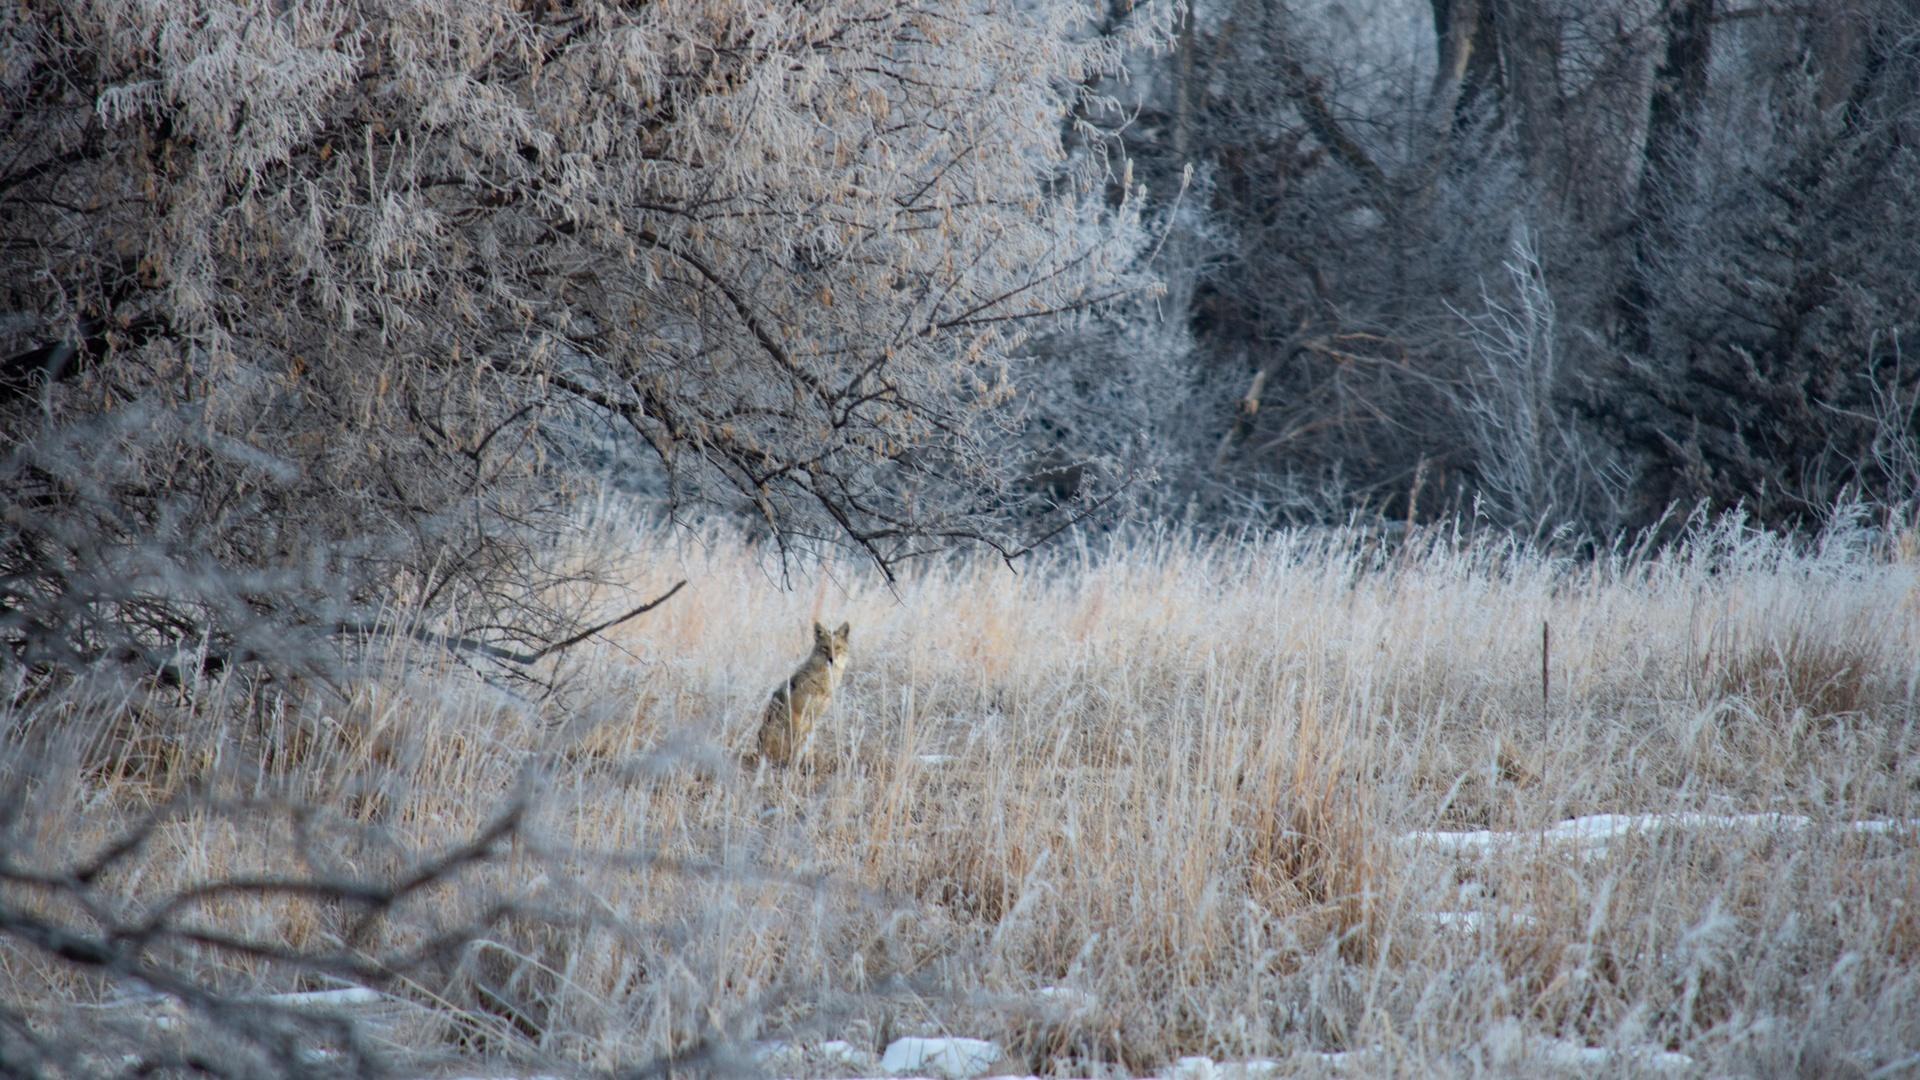 A coyote is sitting in a wooded area. 